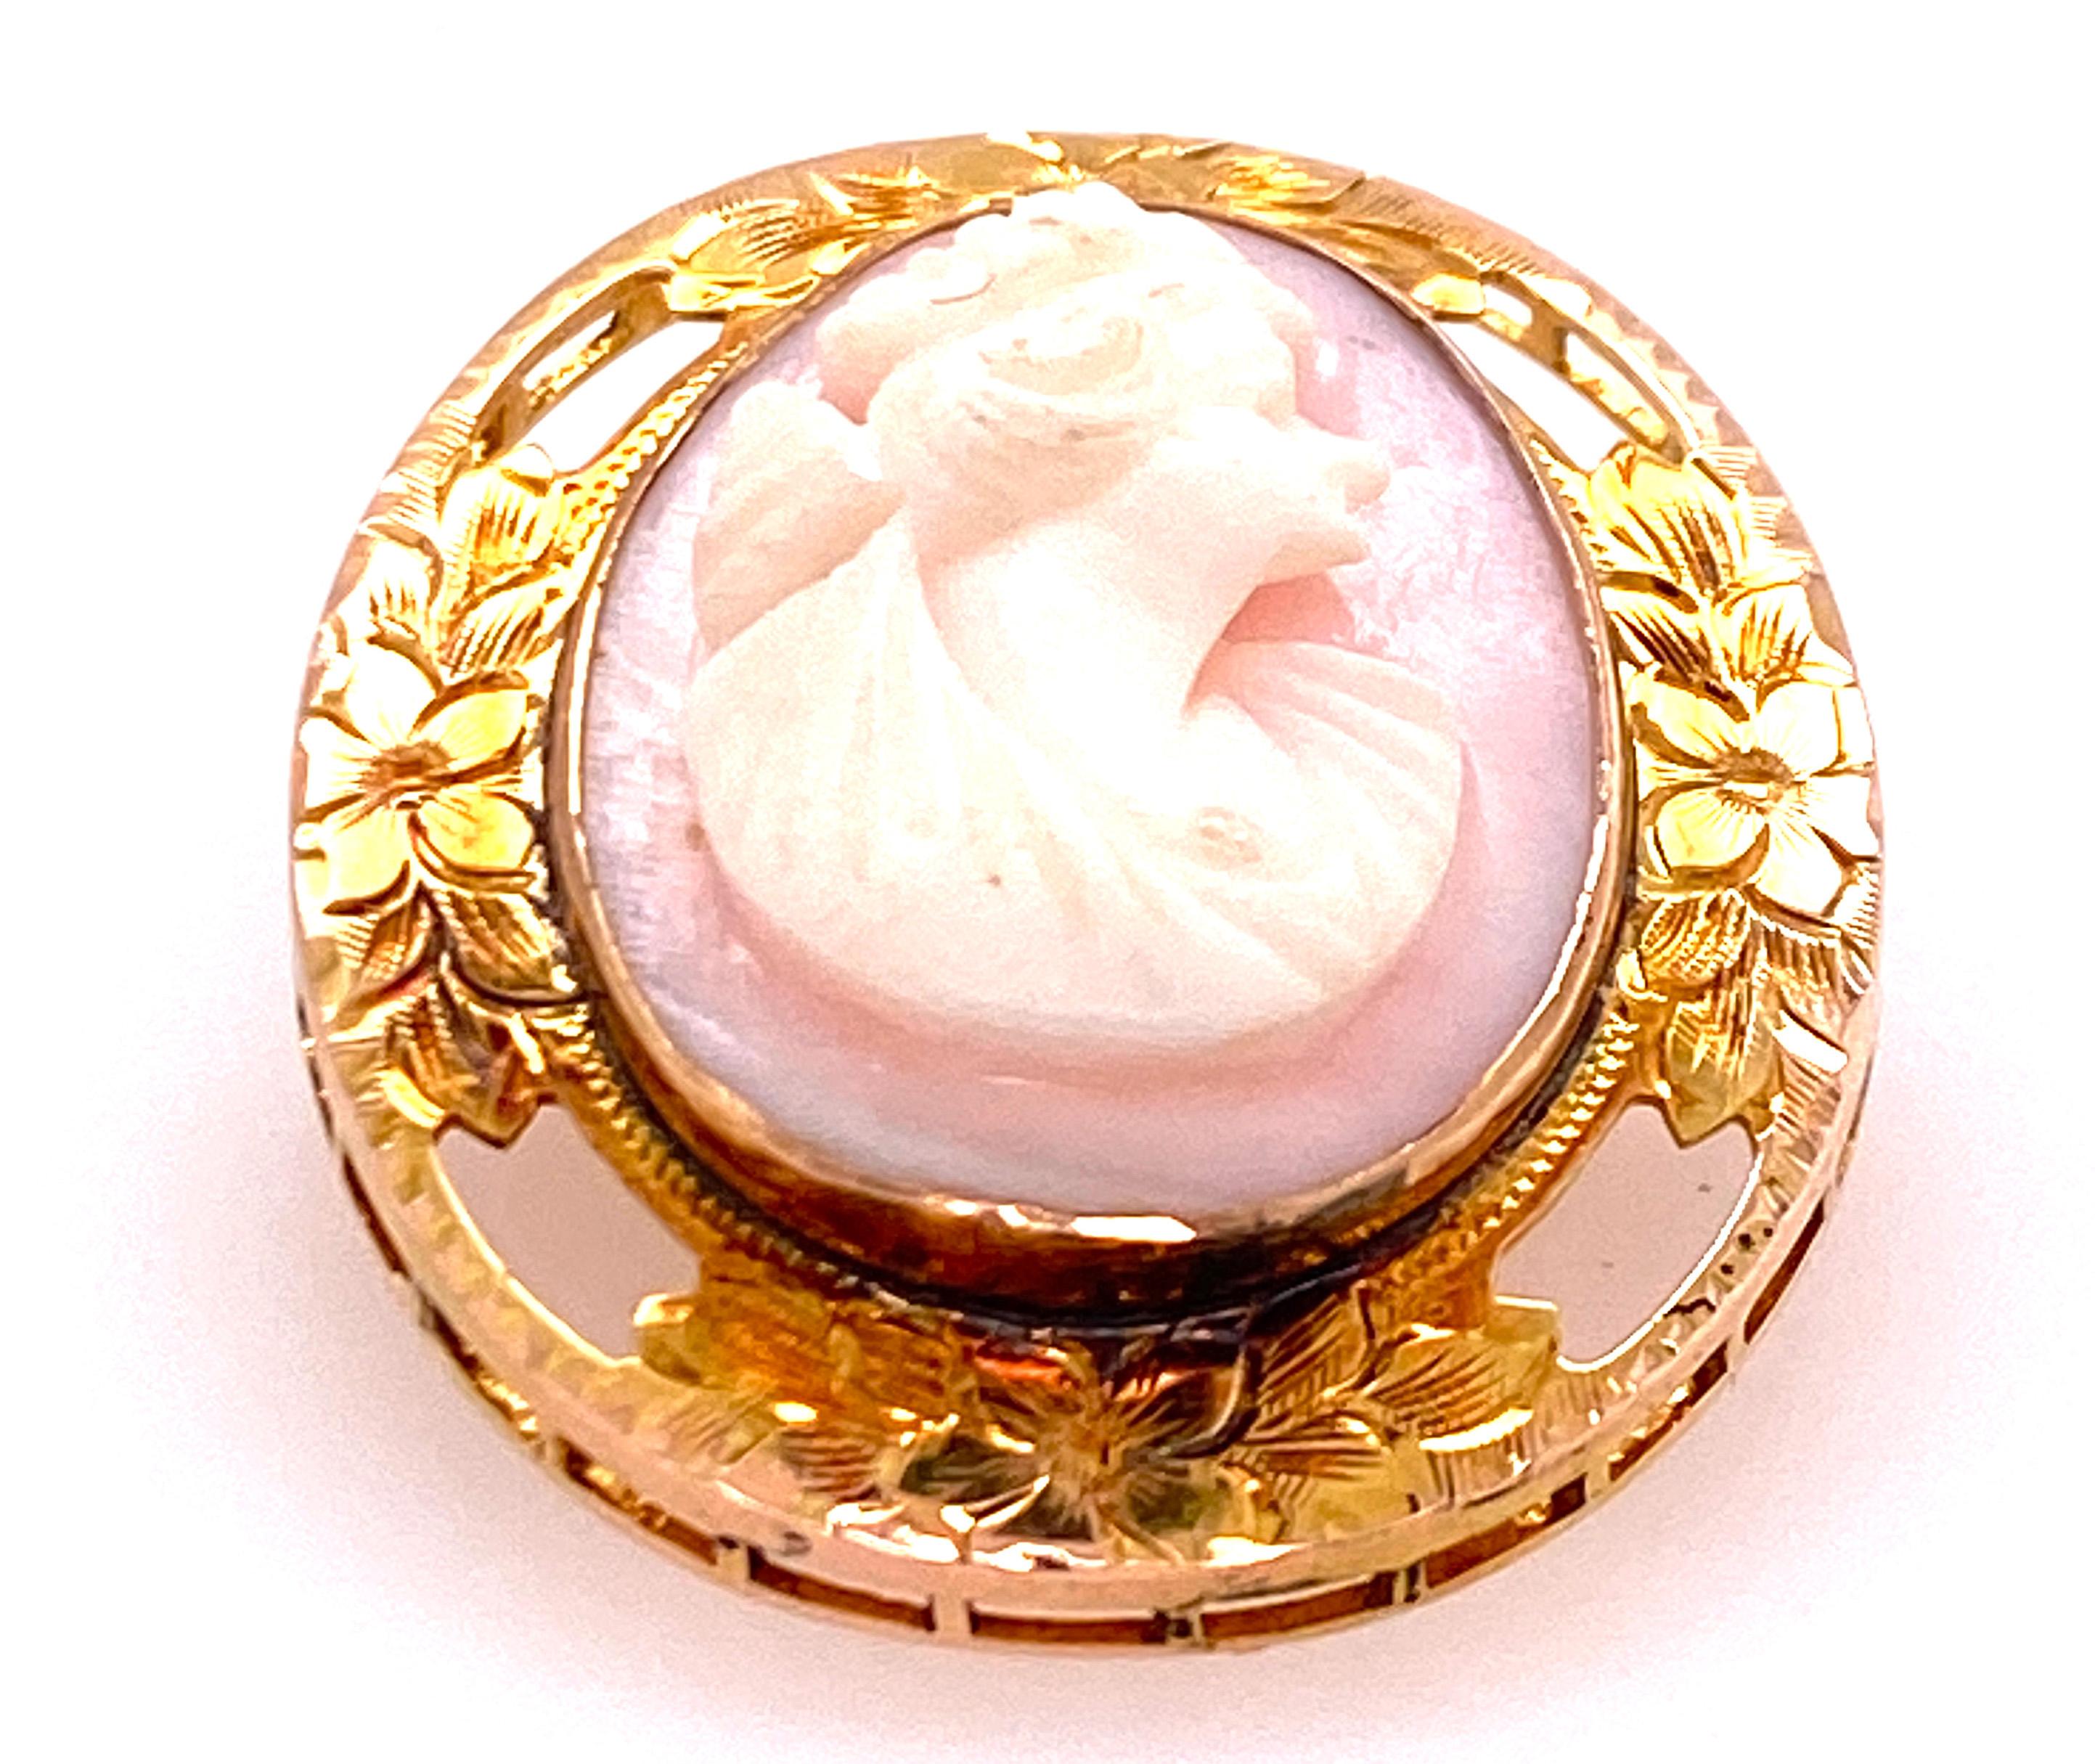 Vintage Cameo Pin Brooch Pendant Art Deco Flowers Yellow Gold



Featuring an Exquisitely Hand Carved  32 x 26m Antique Cameo 

Expertly Hand Cut and Then Engraved

Super Deep Engraving

Flowers on the Sides 

Includes a Bail on the Back So It Can